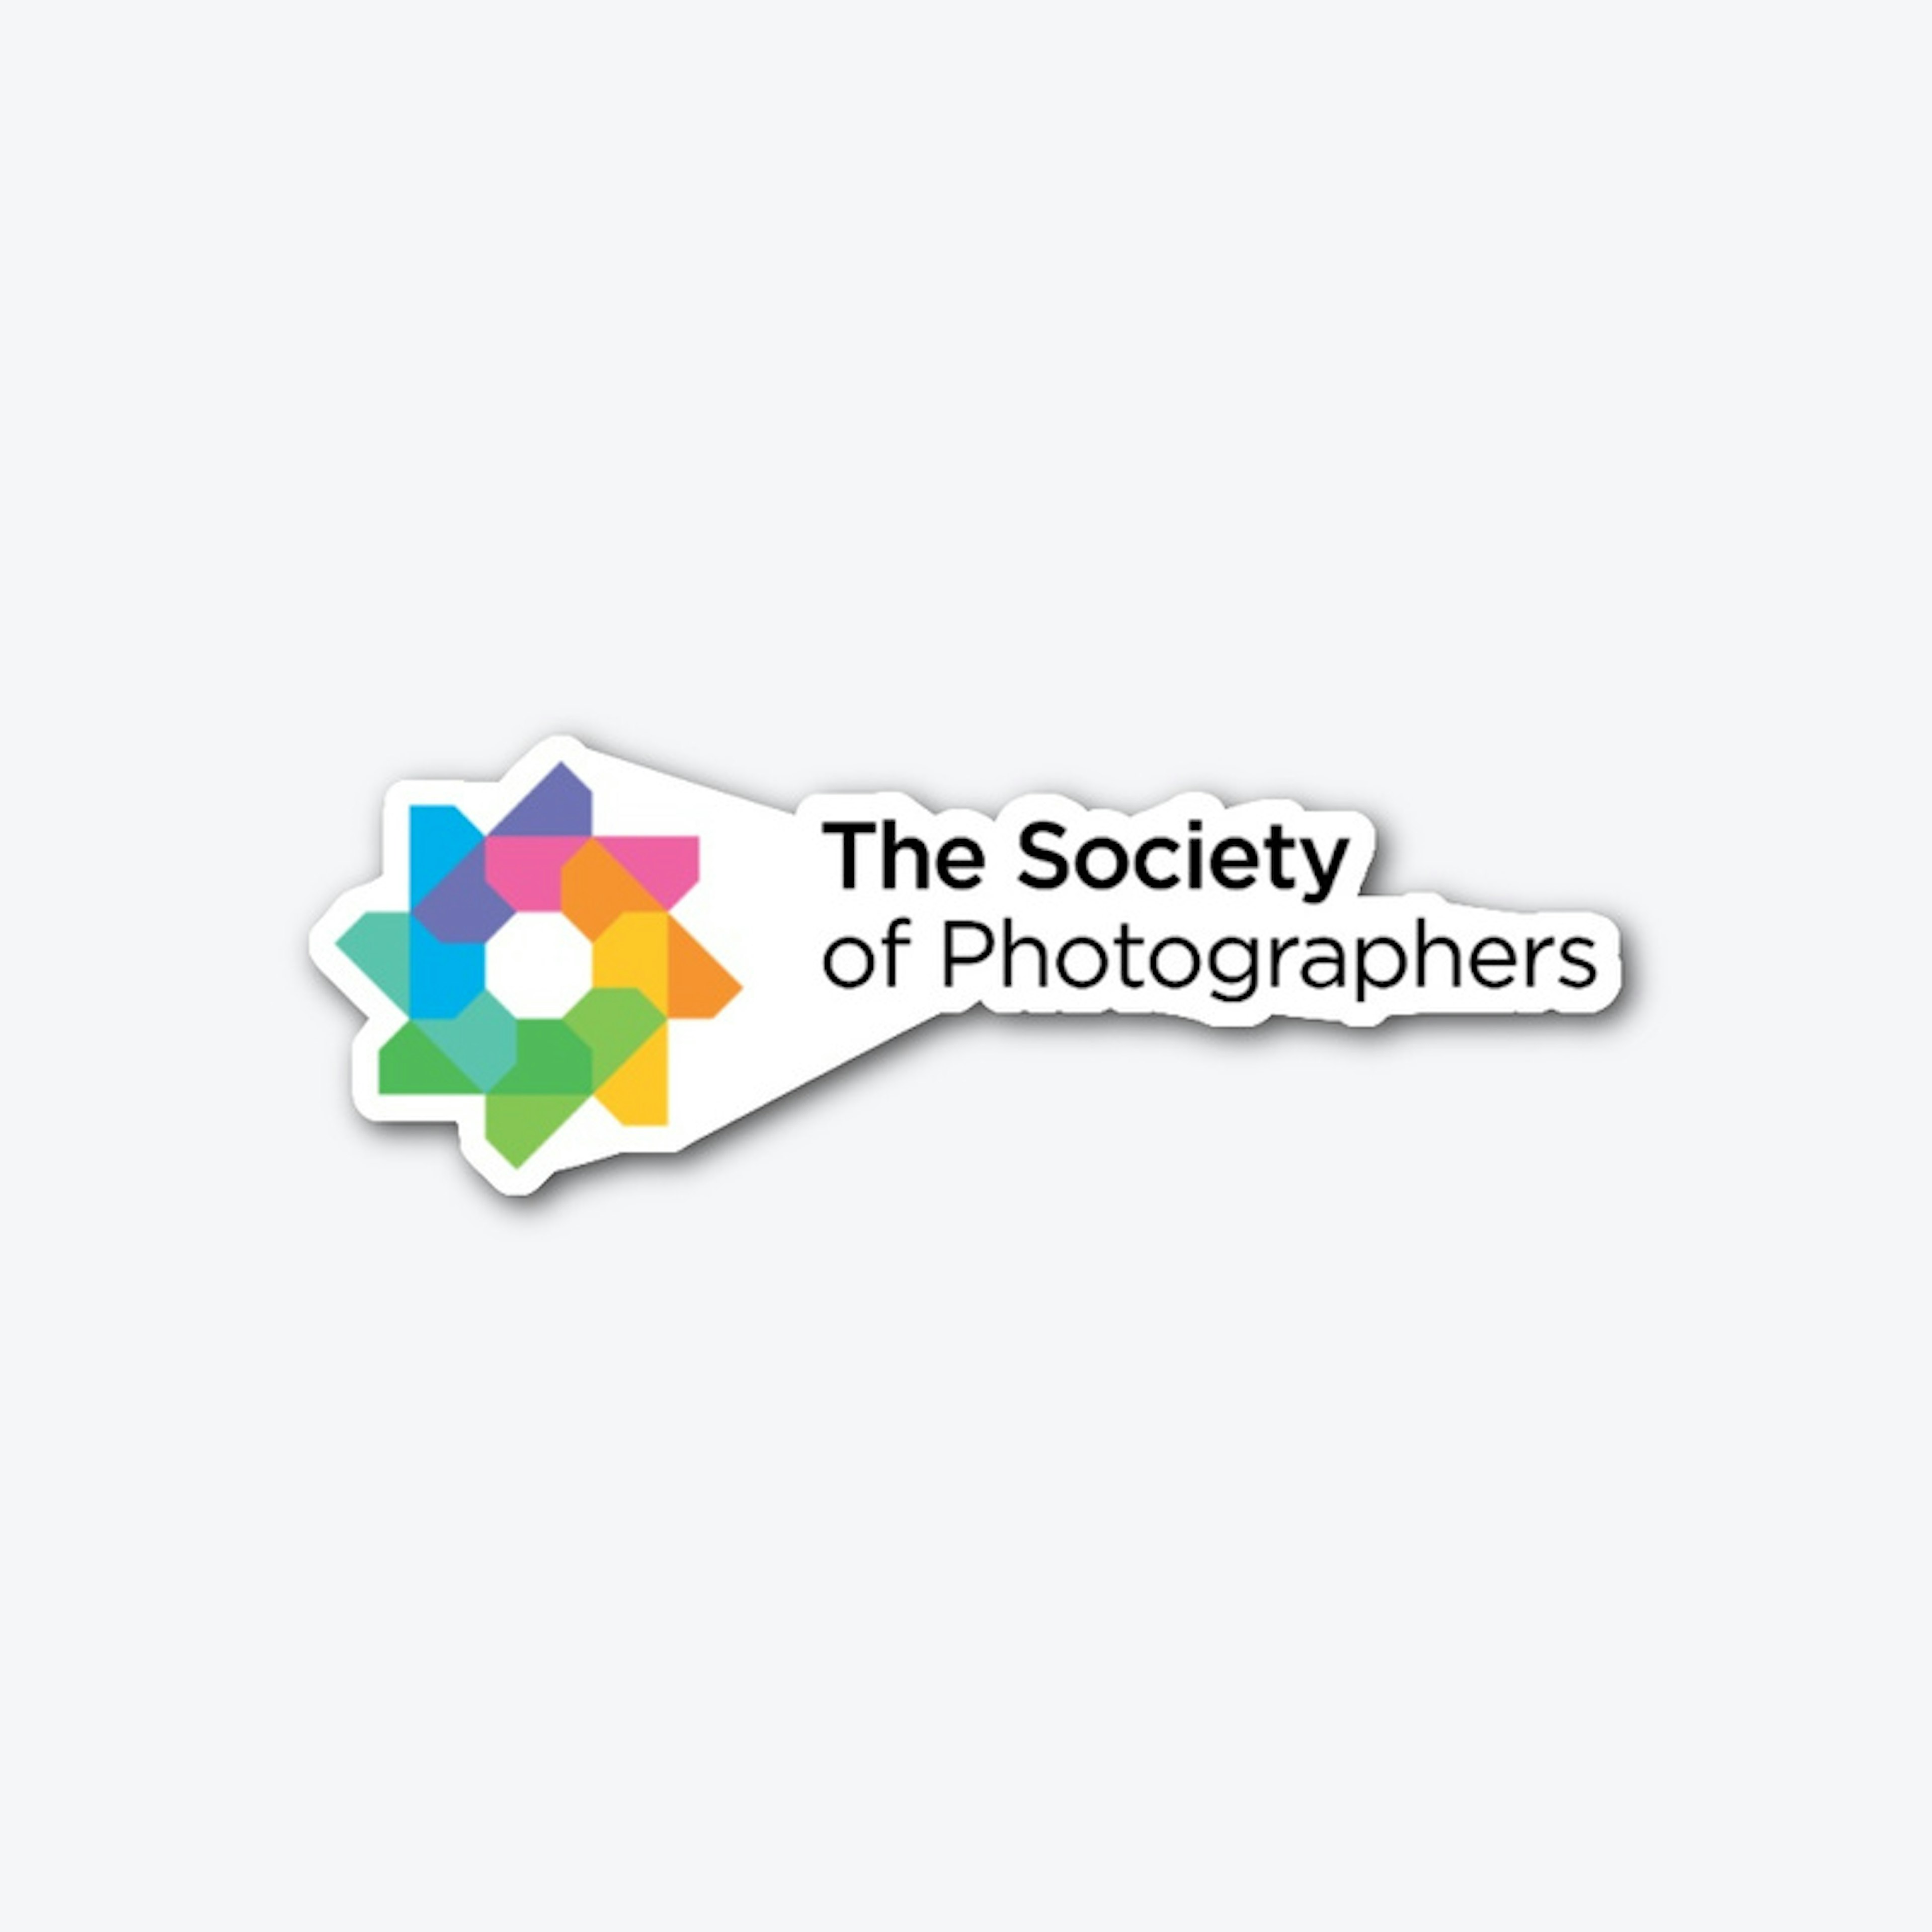 The Society of Photographers